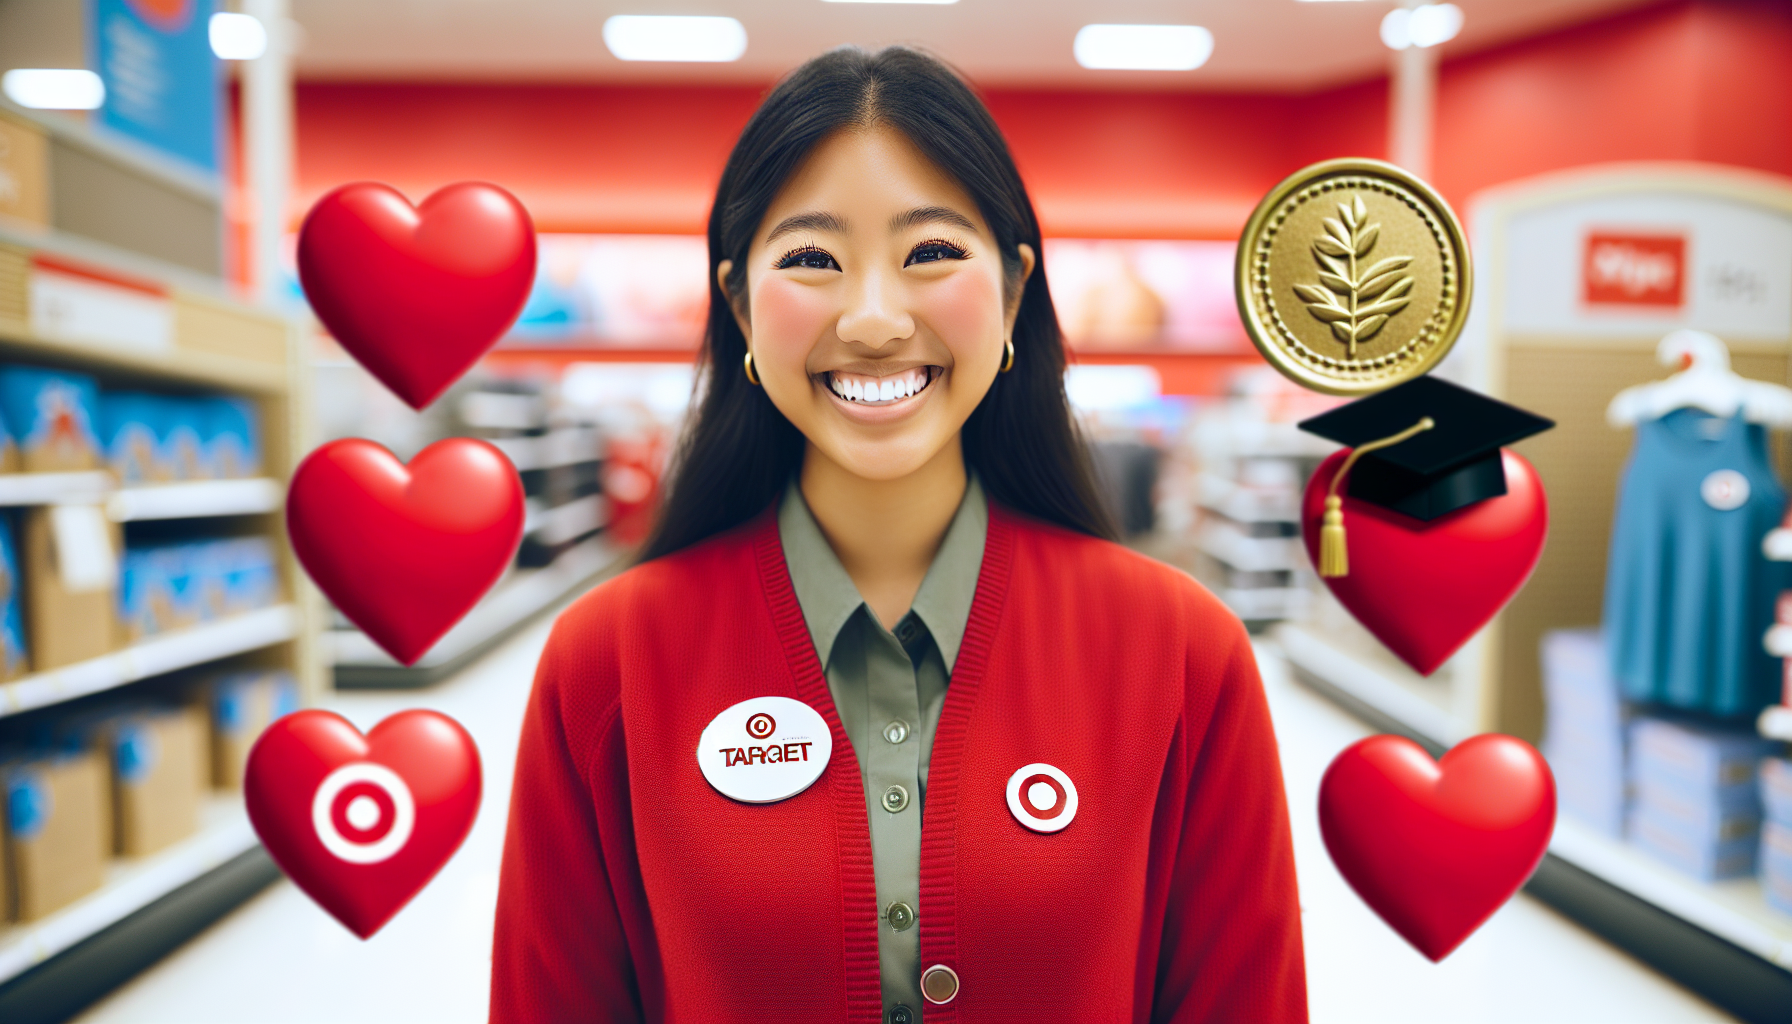 Employee Benefits and Well-Being at Target